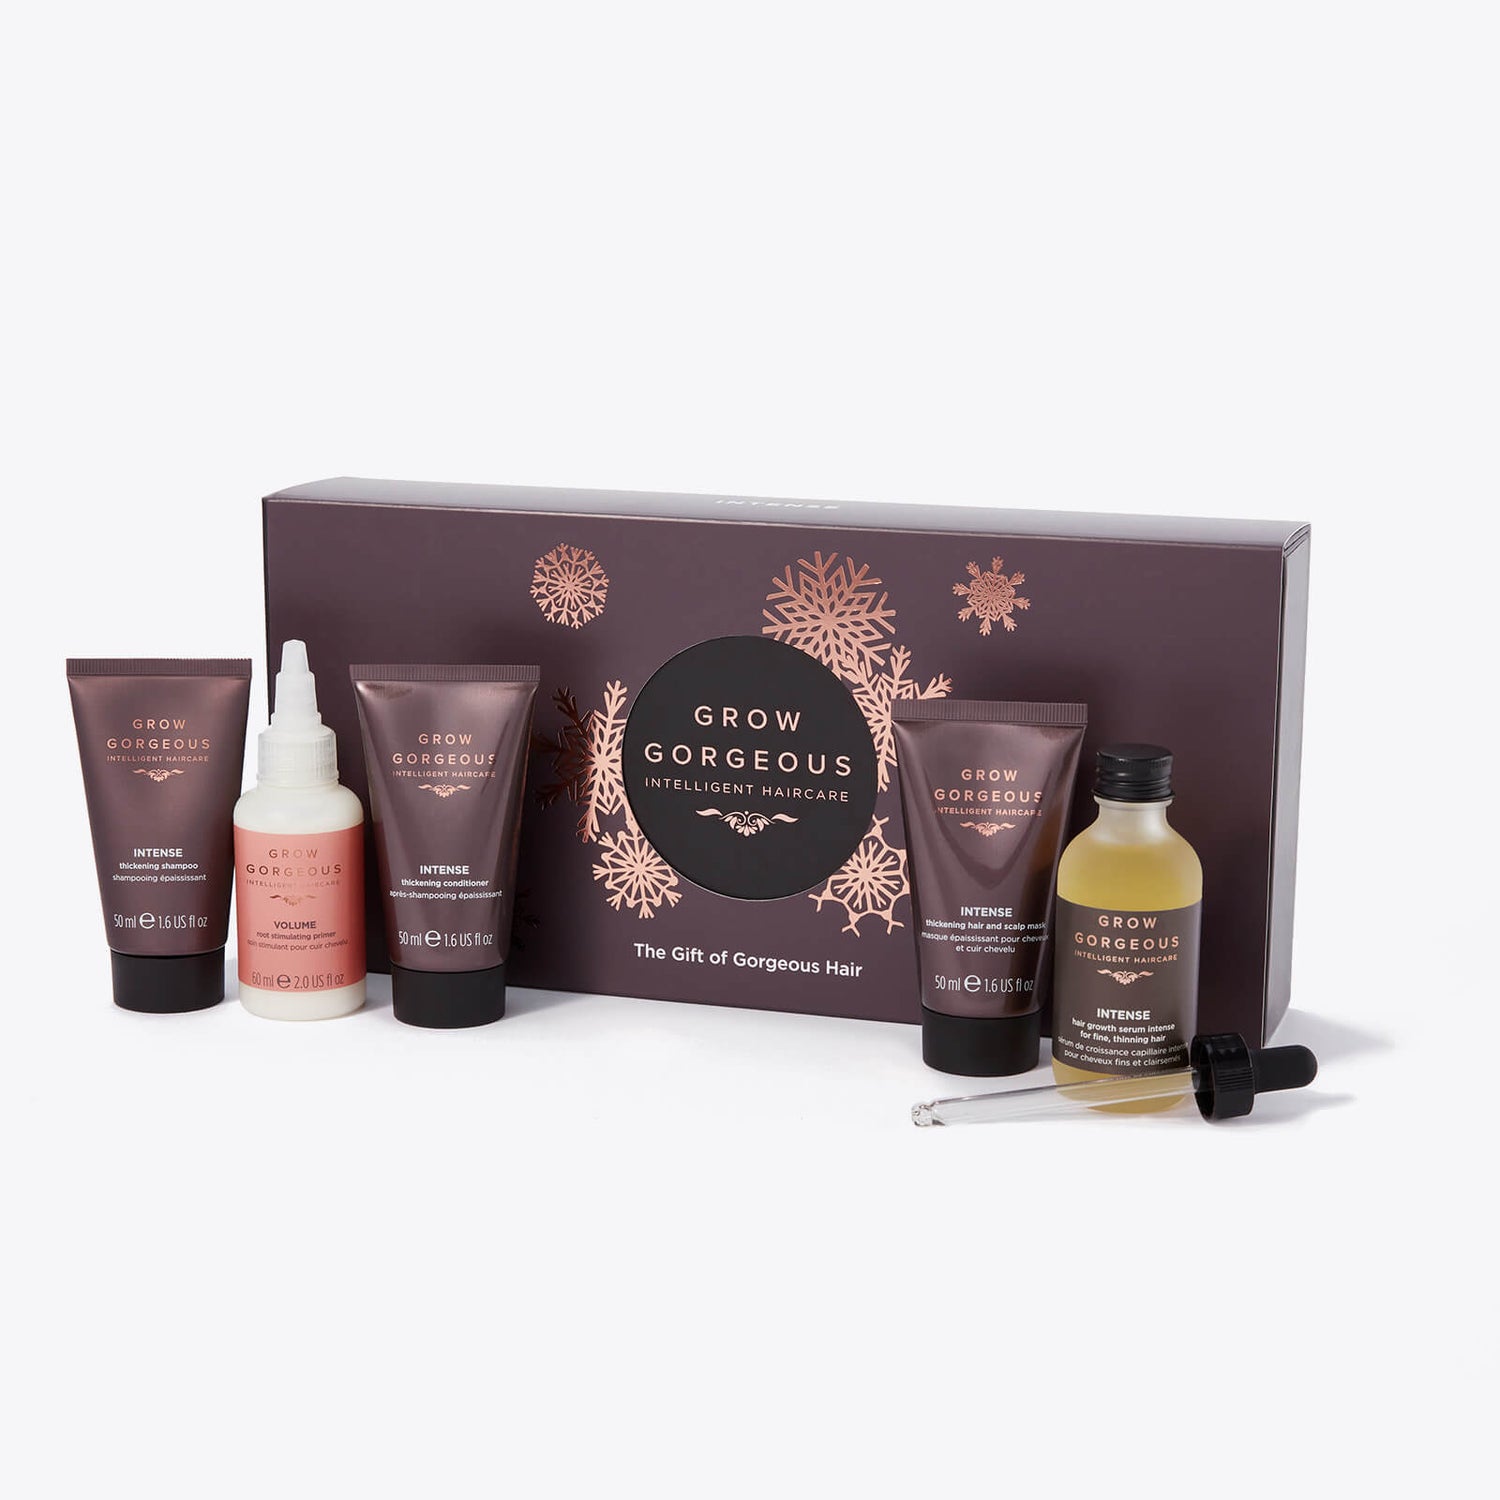 Grow Gorgeous Intense Christmas Gift Collection - Growth (Worth £68.00)